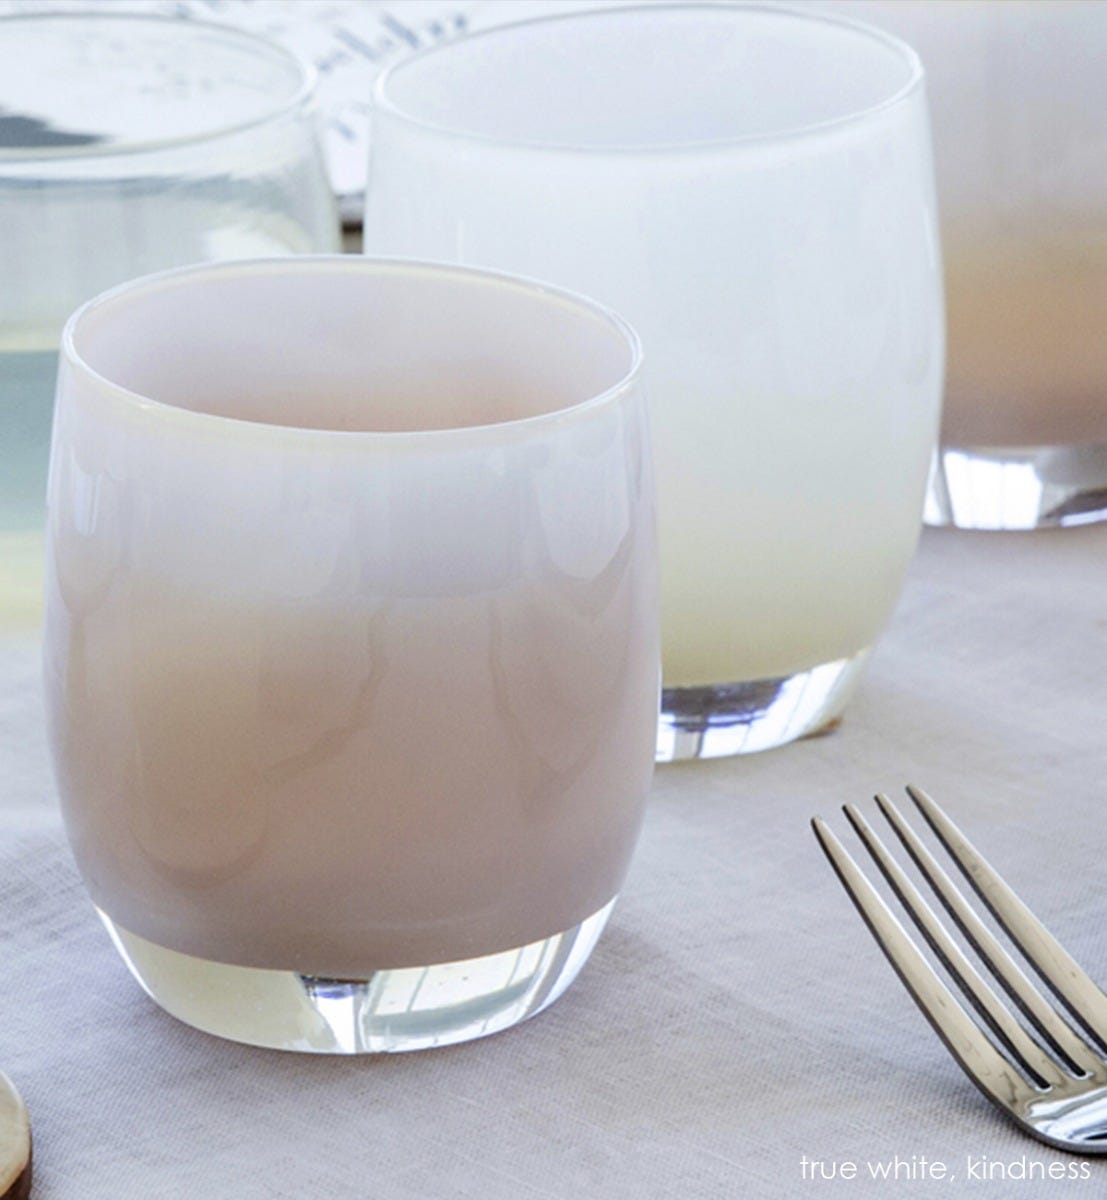 true white, opaque pinky white, hand-blown glass votive candle holder. Paired with kindness.